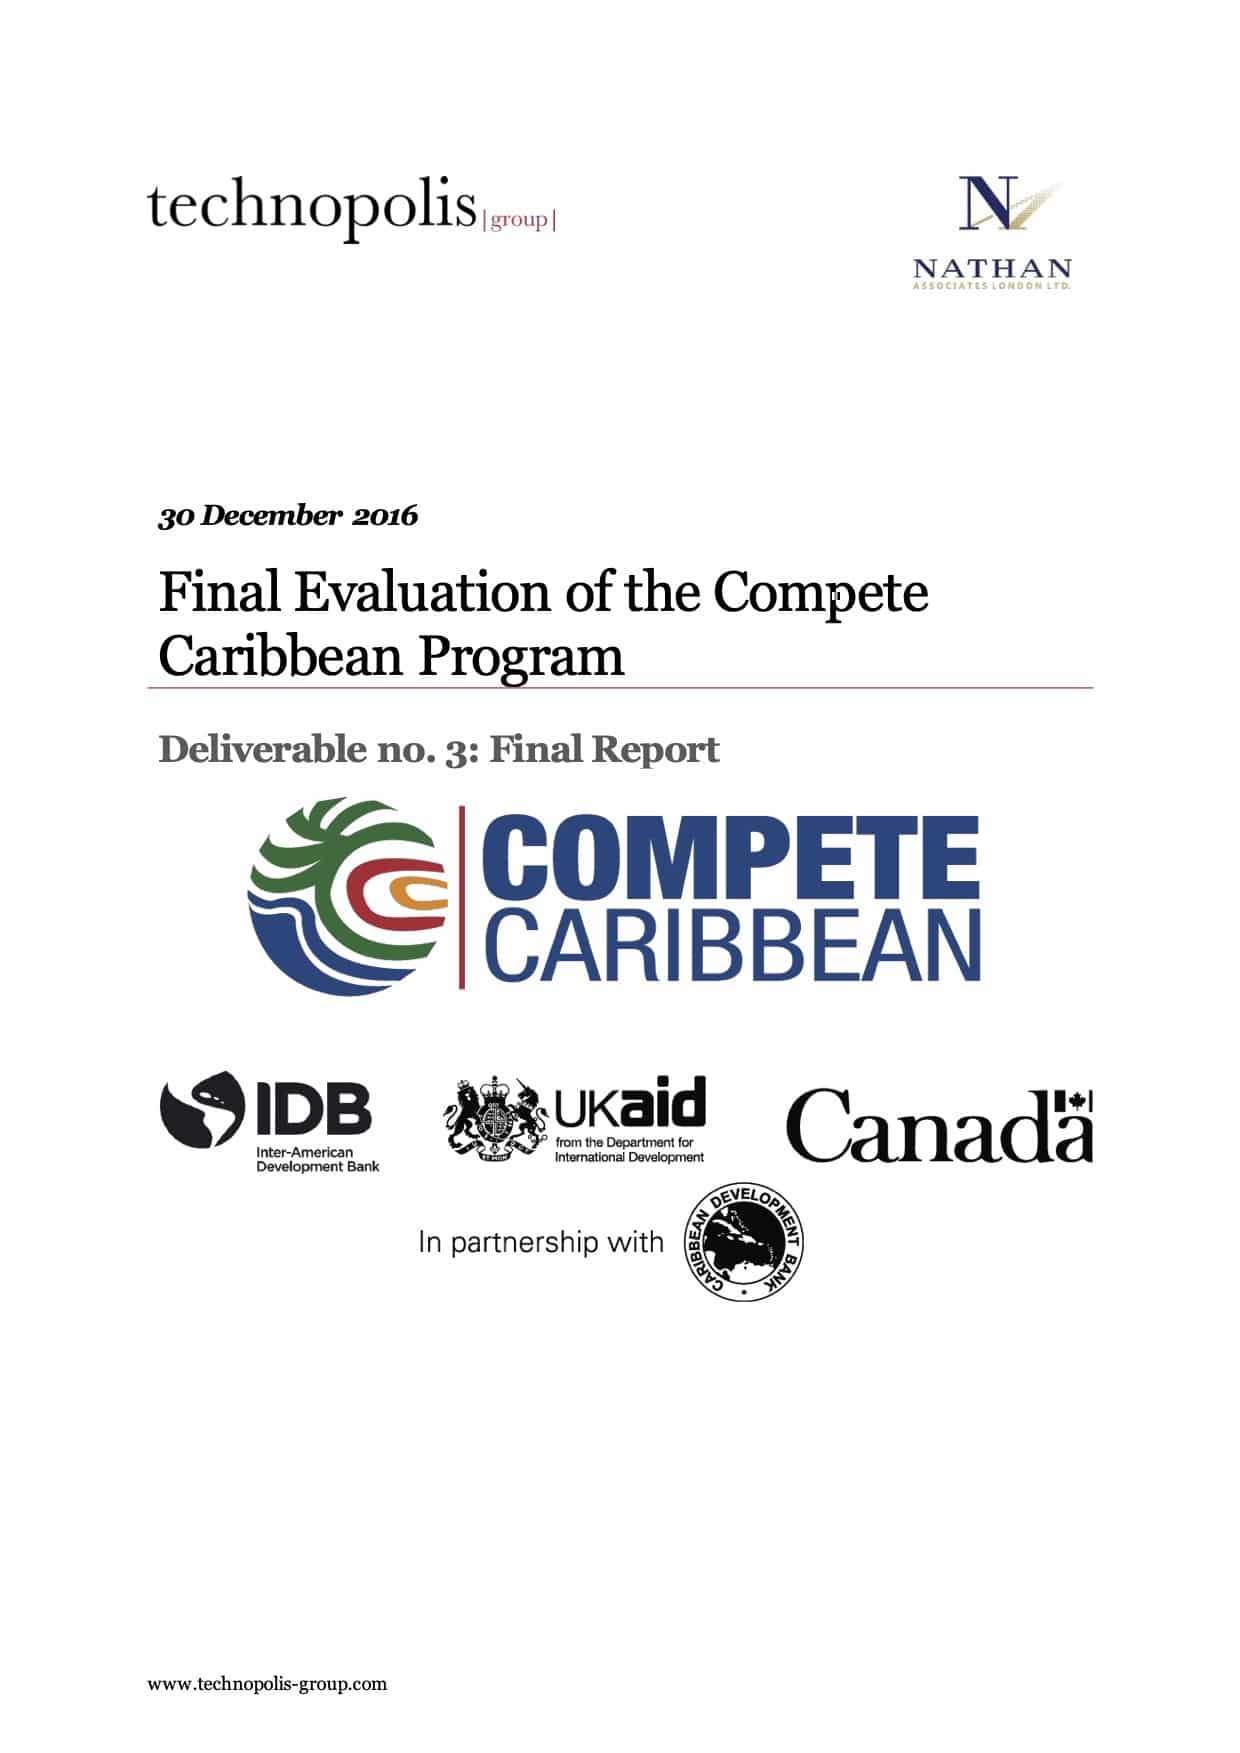 Final Evaluation of the Compete Caribbean Program